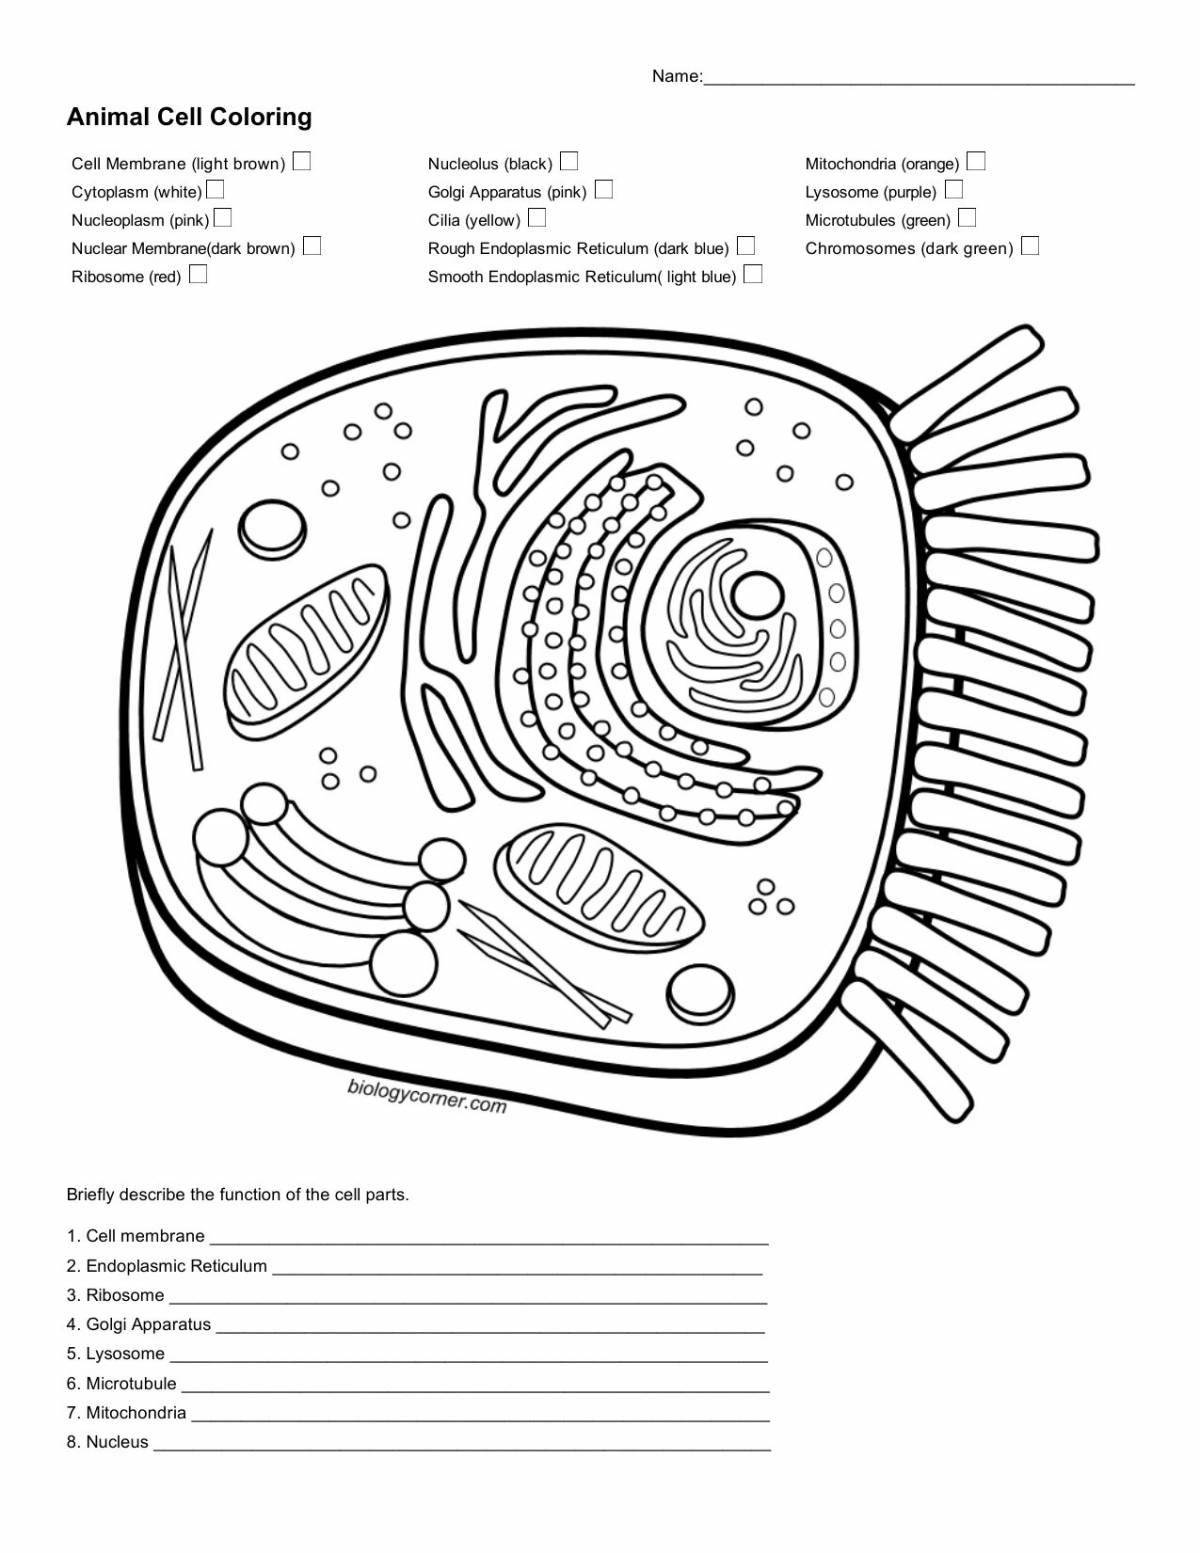 Amazing plant cell coloring page